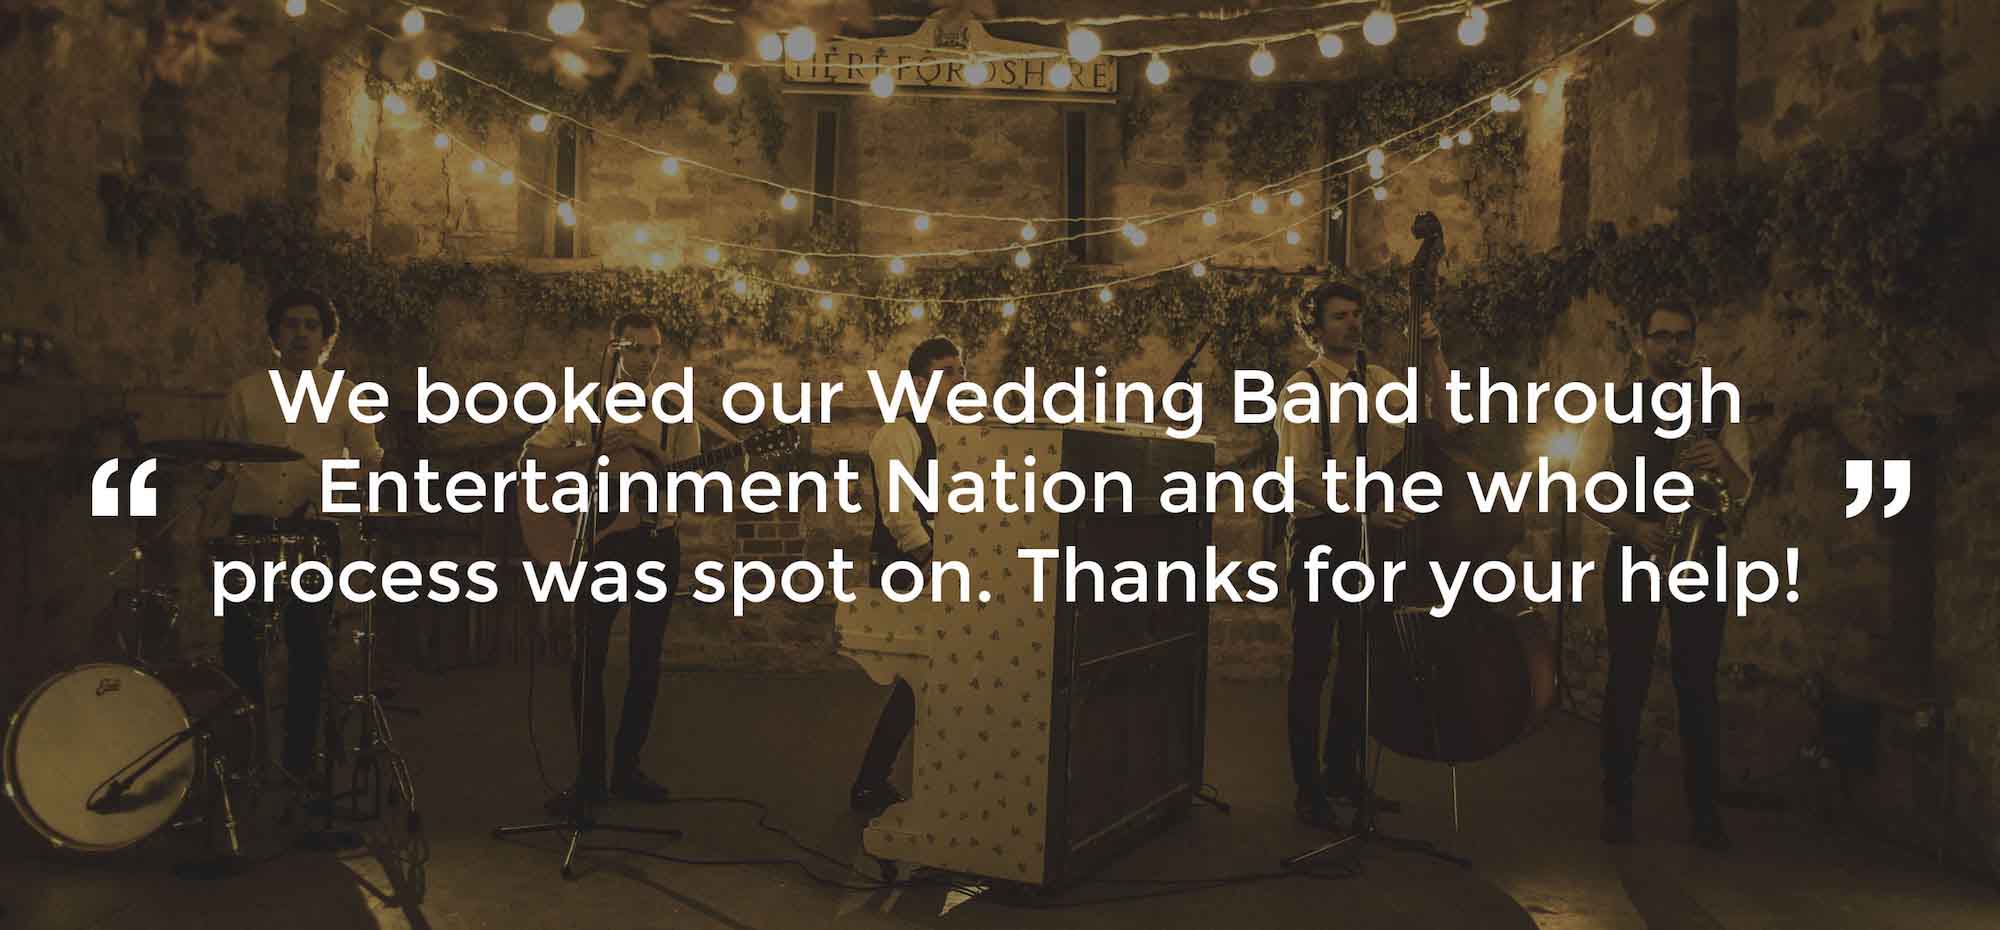 Client Review of a Wedding Band West Glamorgan